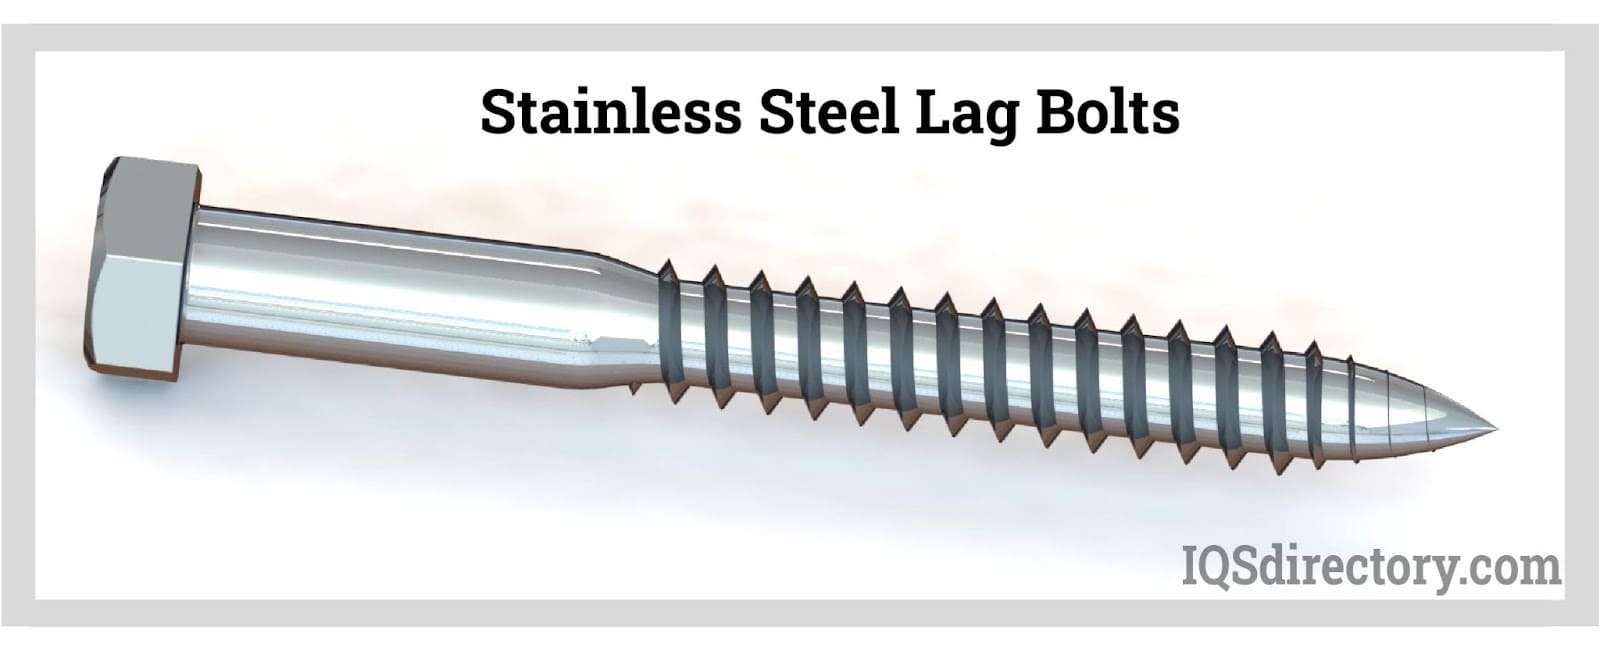 stainless steel lag bolts